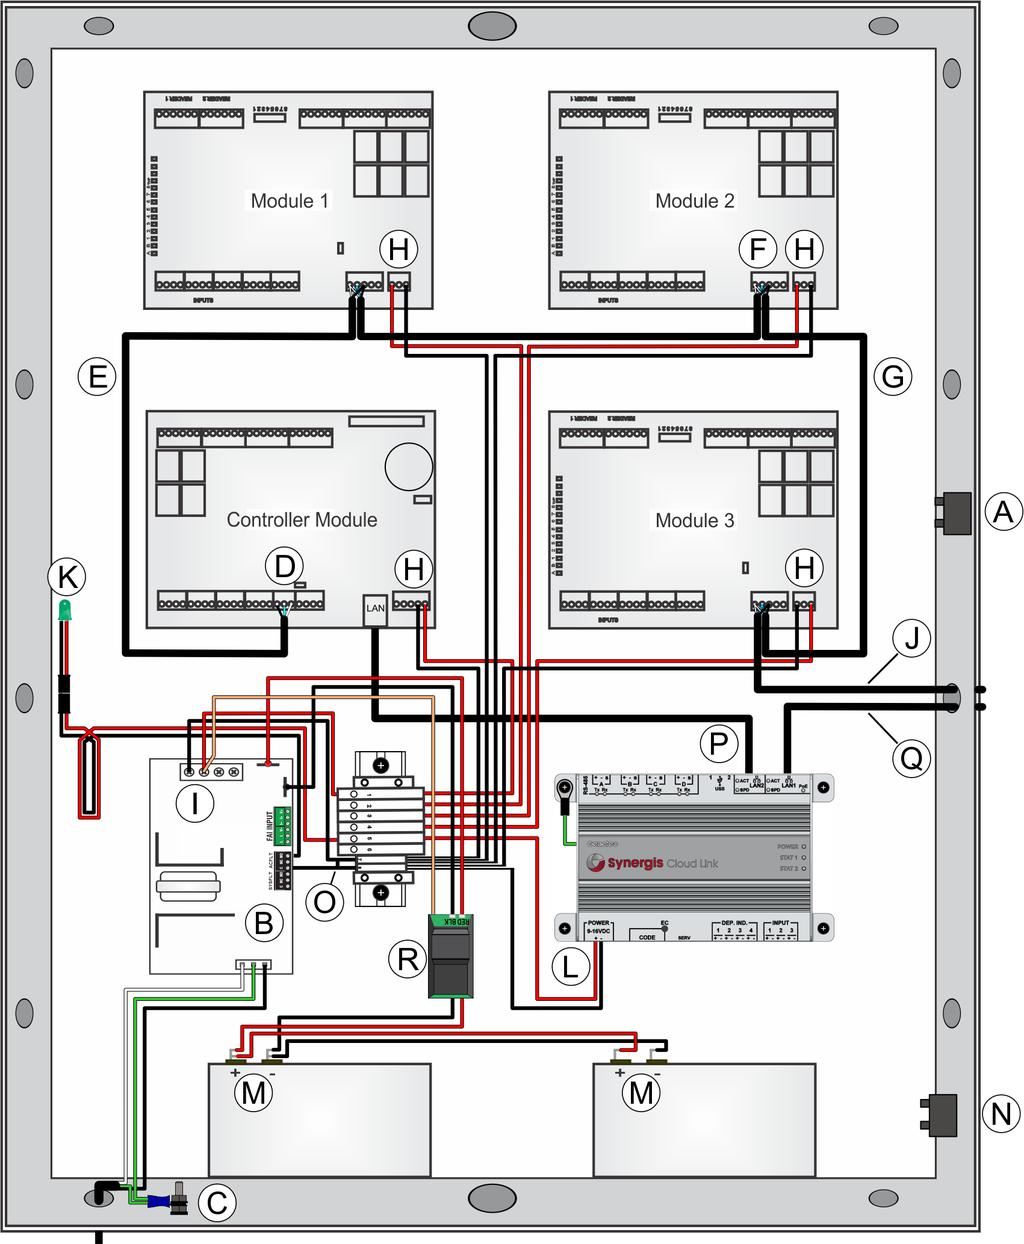 Synergis enclosure wiring Synergis wiring diagram: 3 Mercury modules with Mercury controller, Synergis Cloud Link, fuse assembly, and power supply Before installing the Synergis enclosure and its